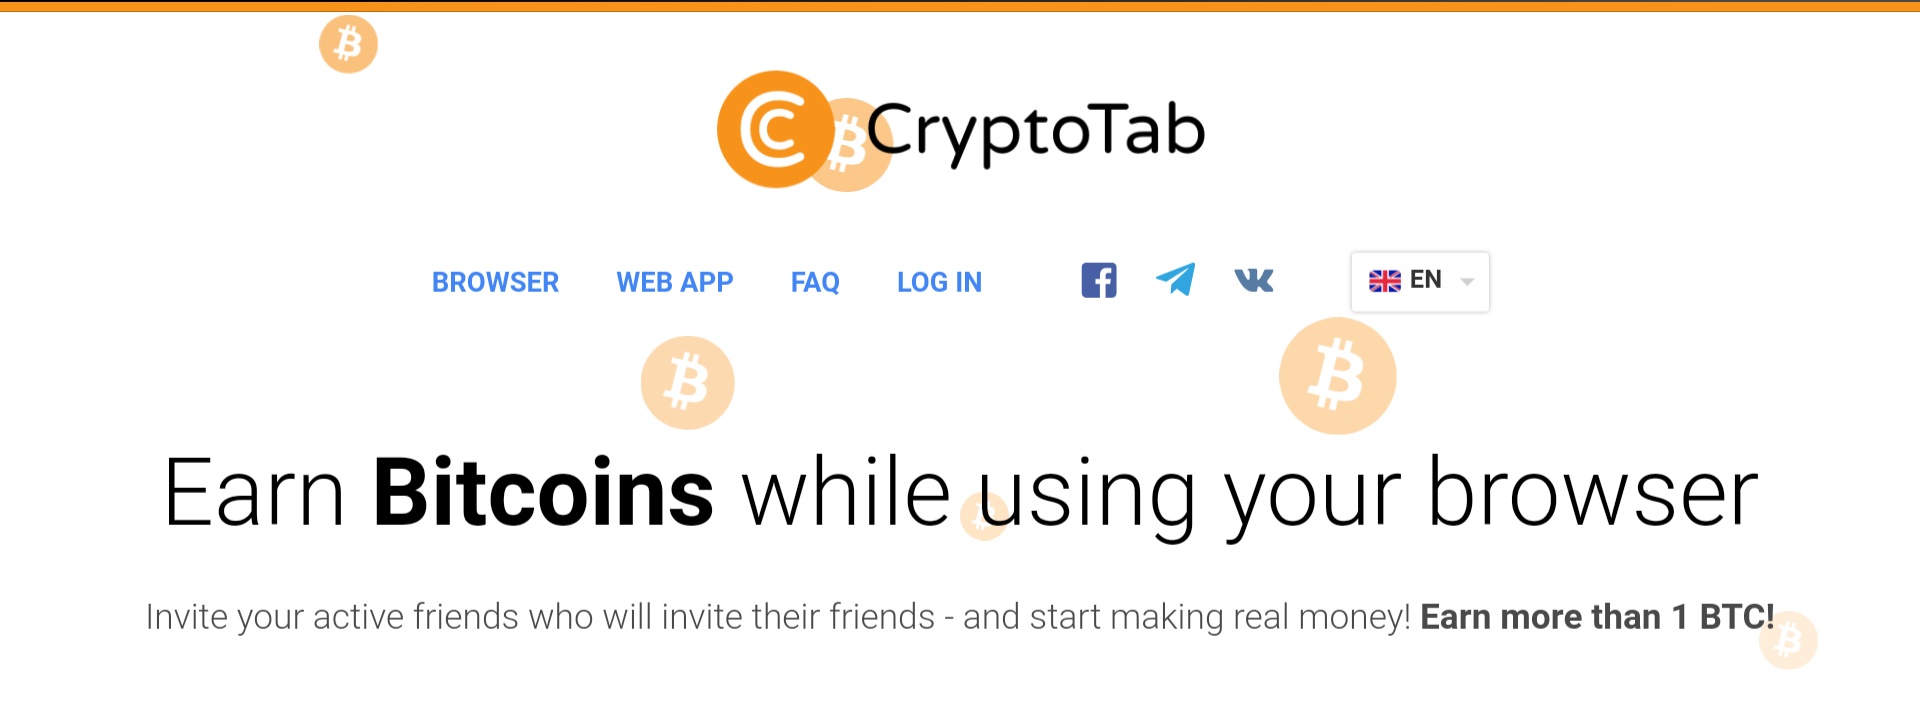 Cryptotab Review Scam Bitcoin - 